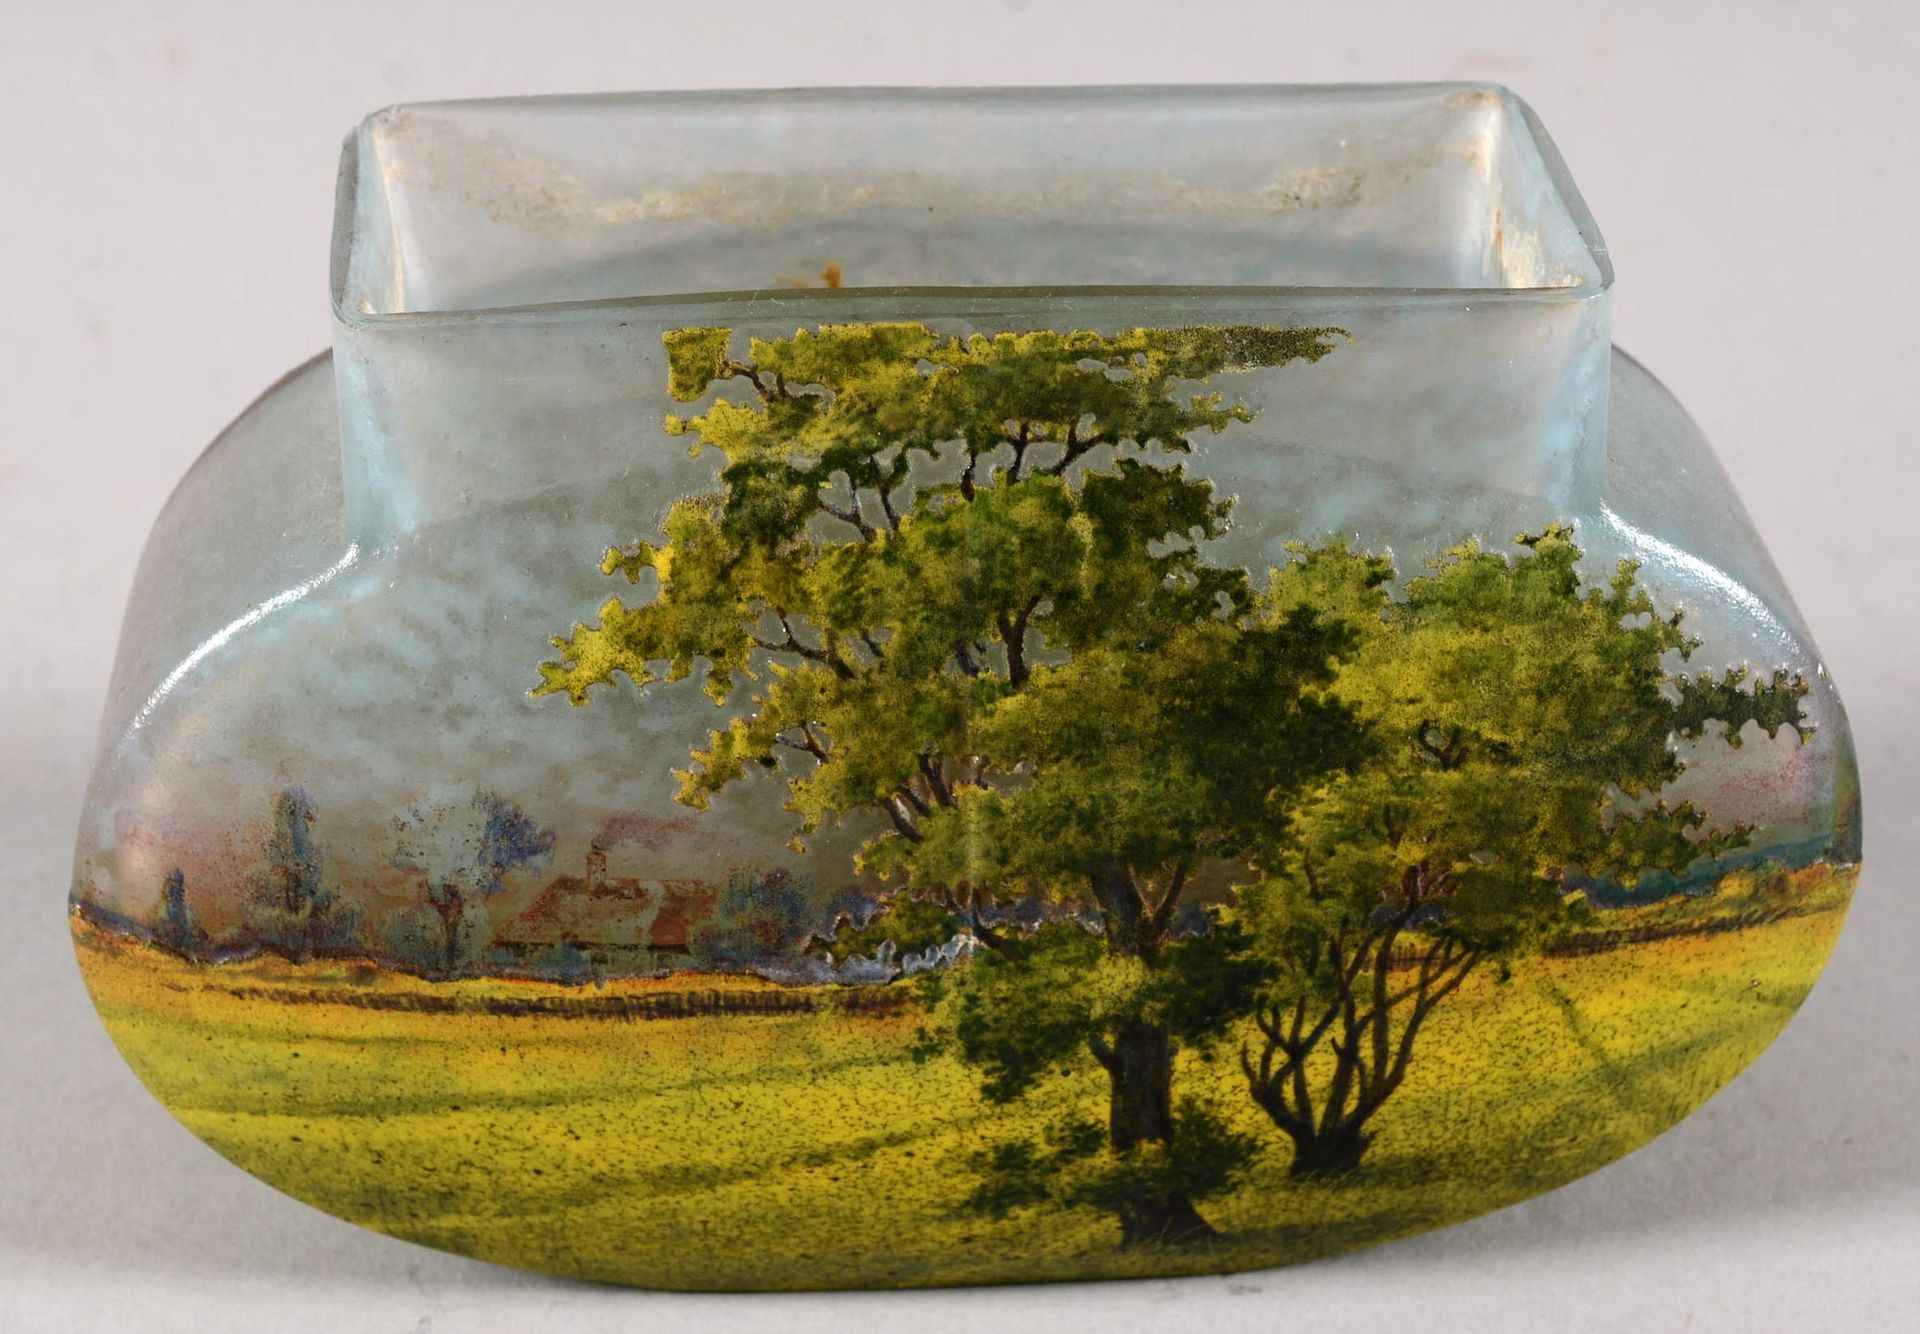 DAUM Nancy DAUM Nancy

Planter in doubled glass with acid-etched decoration of a&hellip;